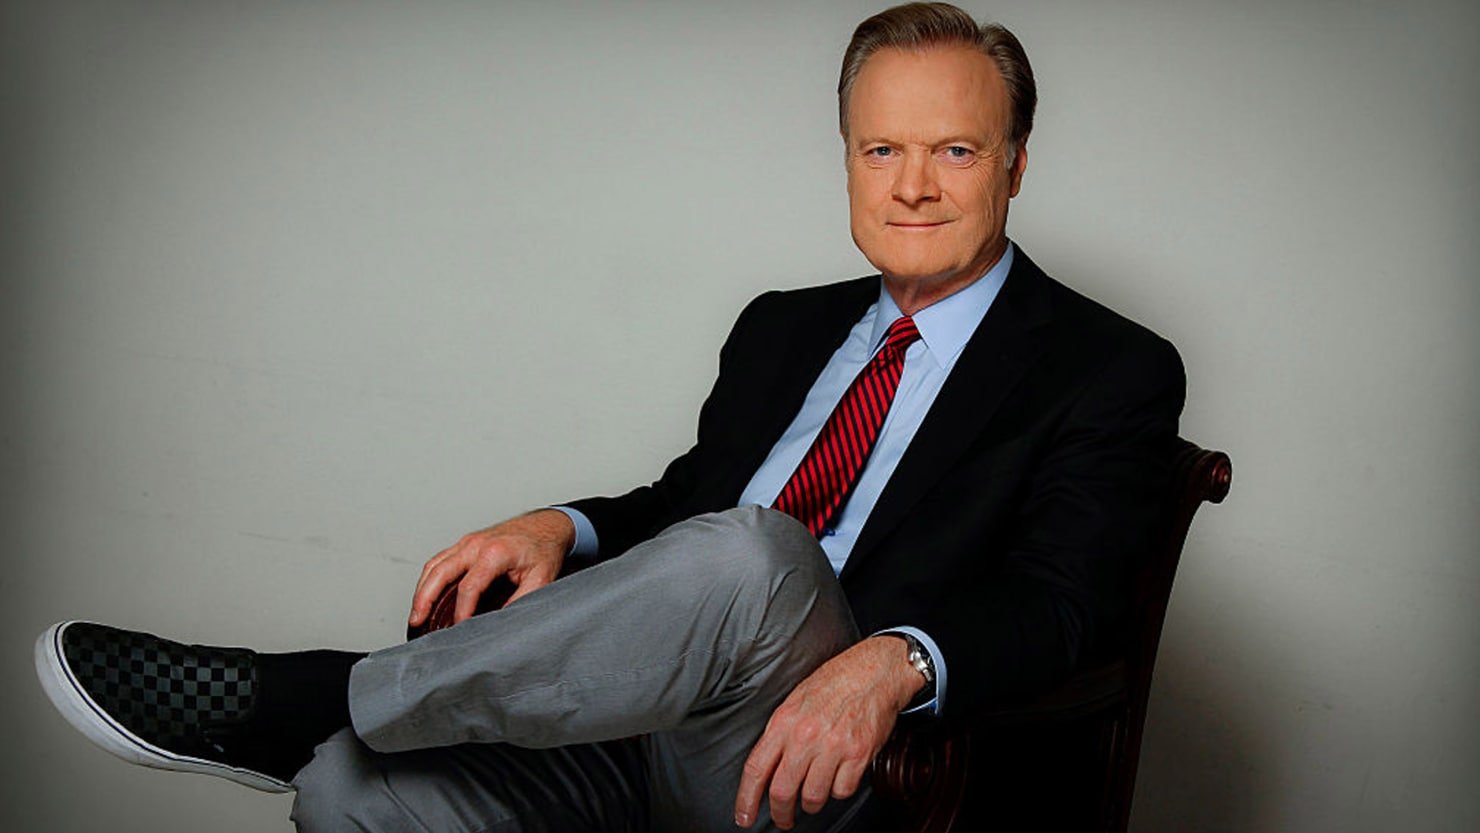 lawrence O'donnell